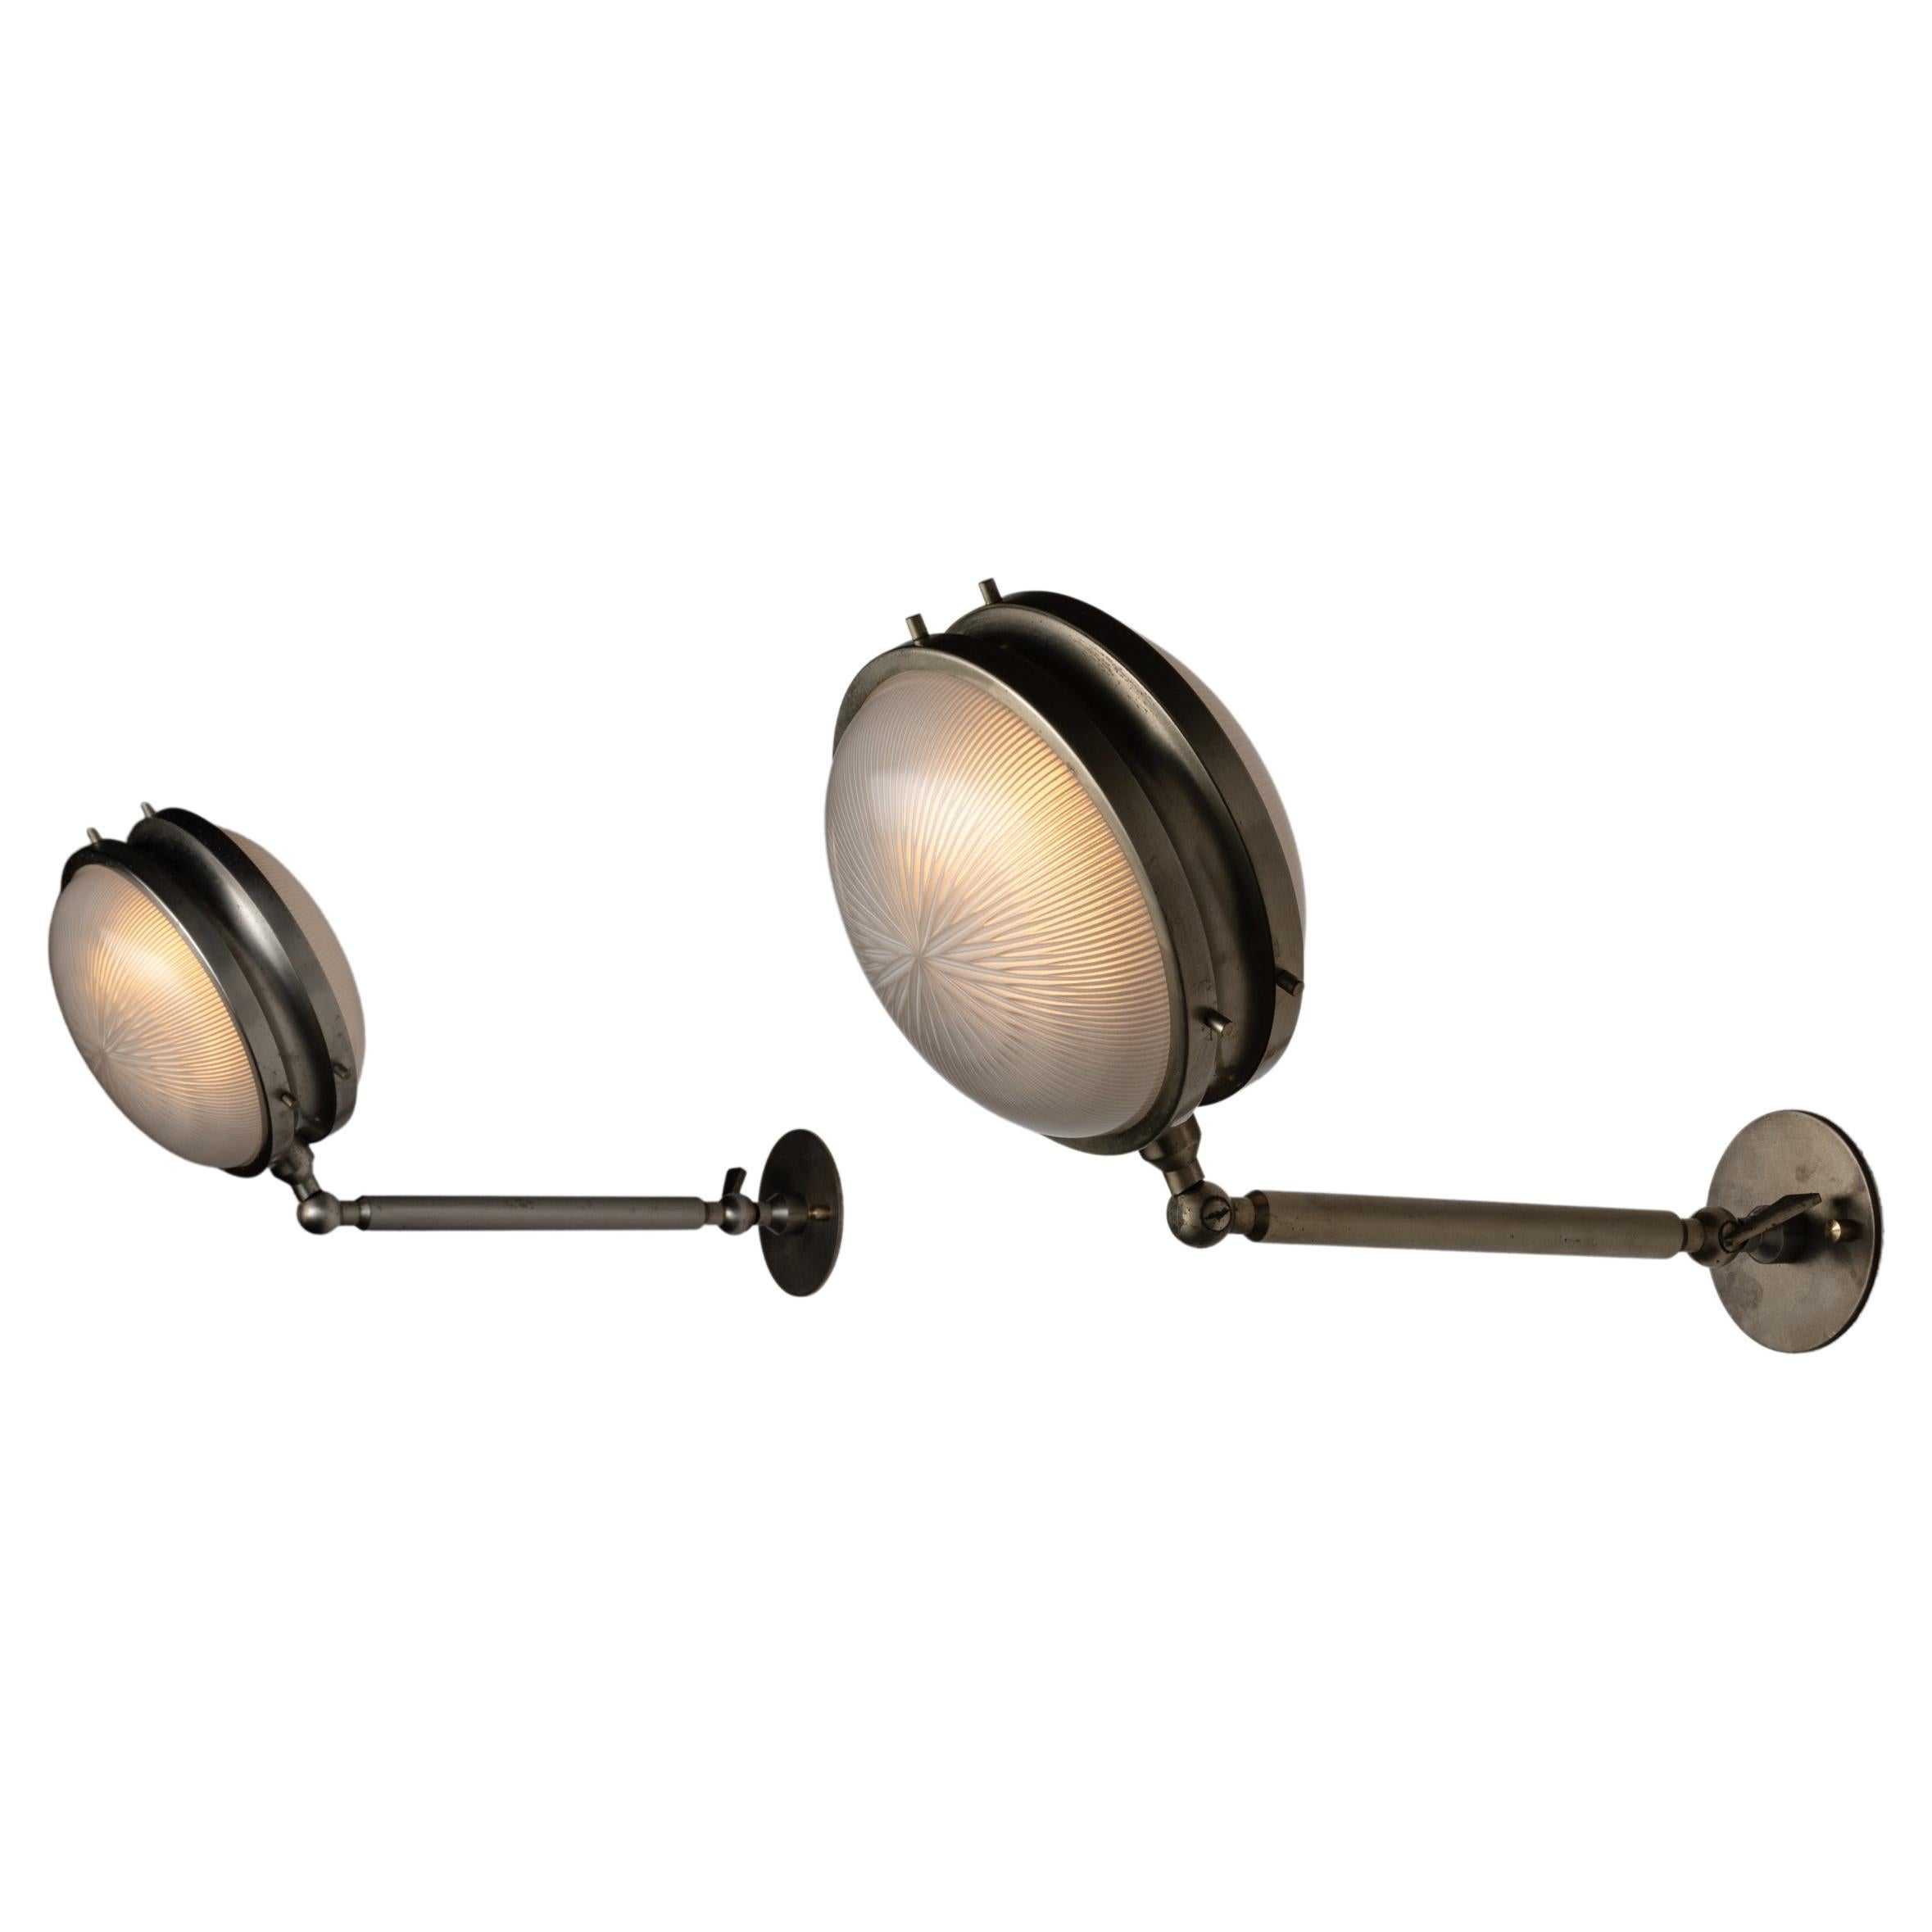 Pair of “Gamma” Sconces by Sergio Mazza for Artemide